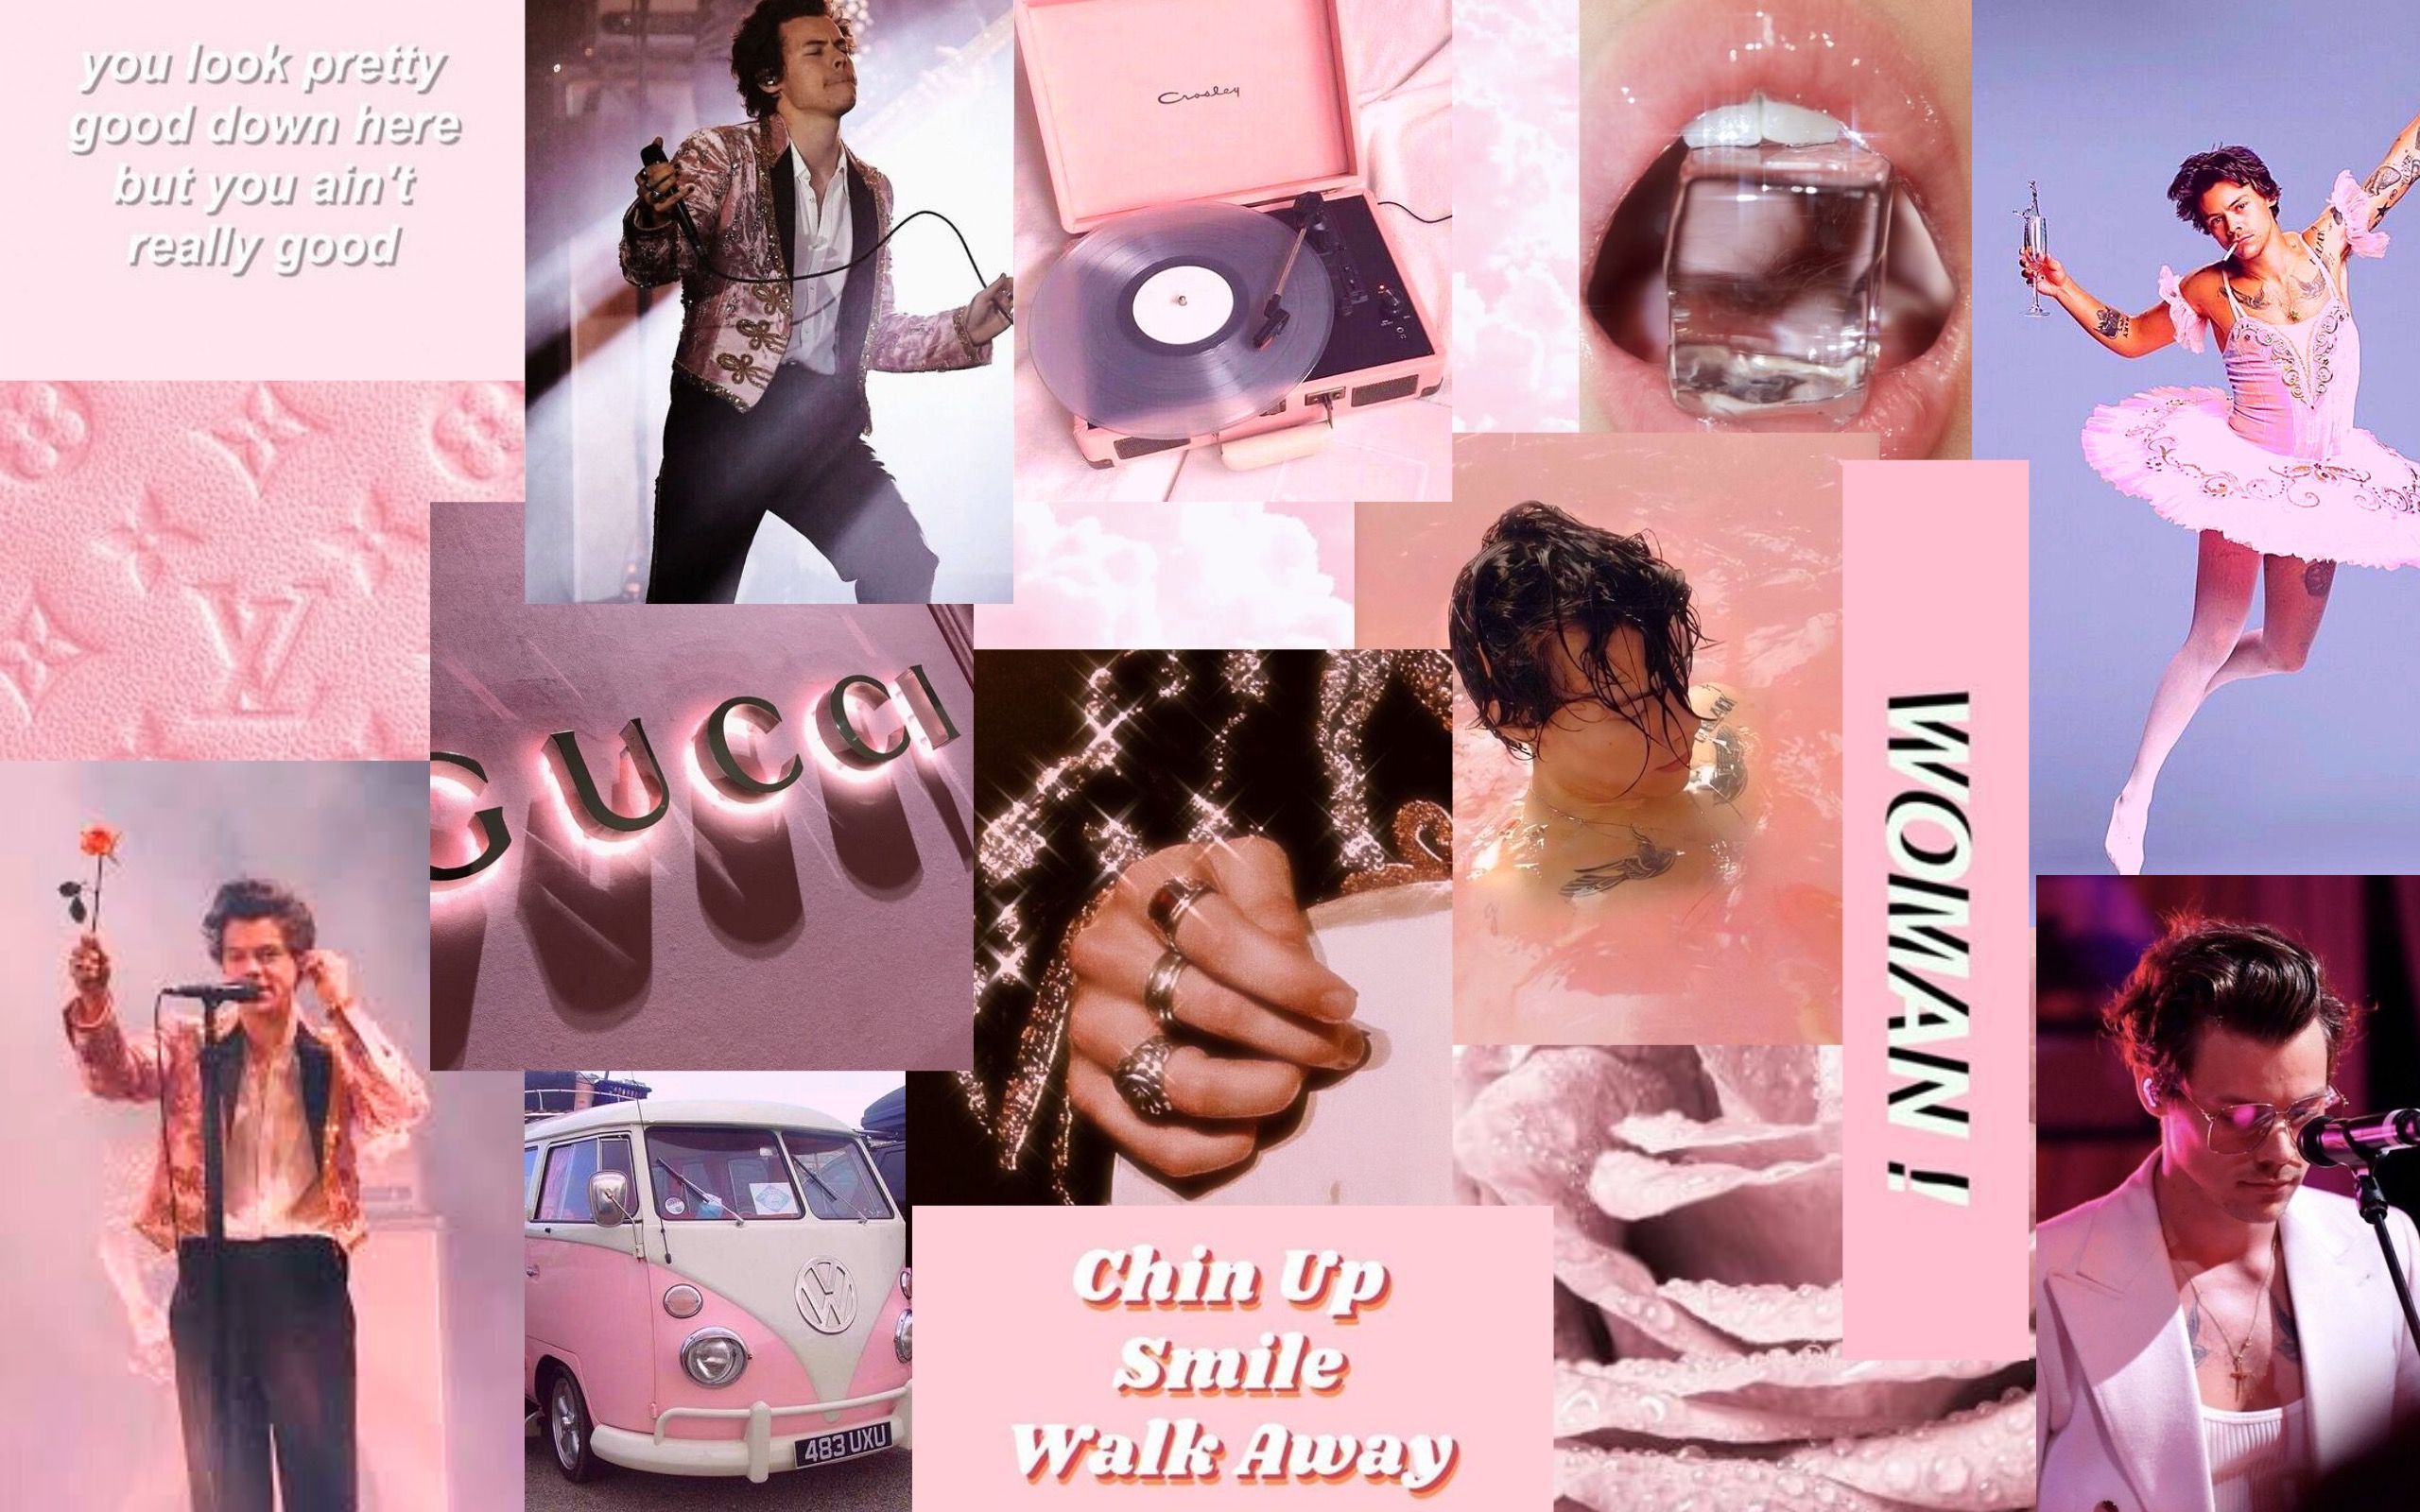 A collage of pink and purple images including Harry Styles, a pink VW van, and the words 